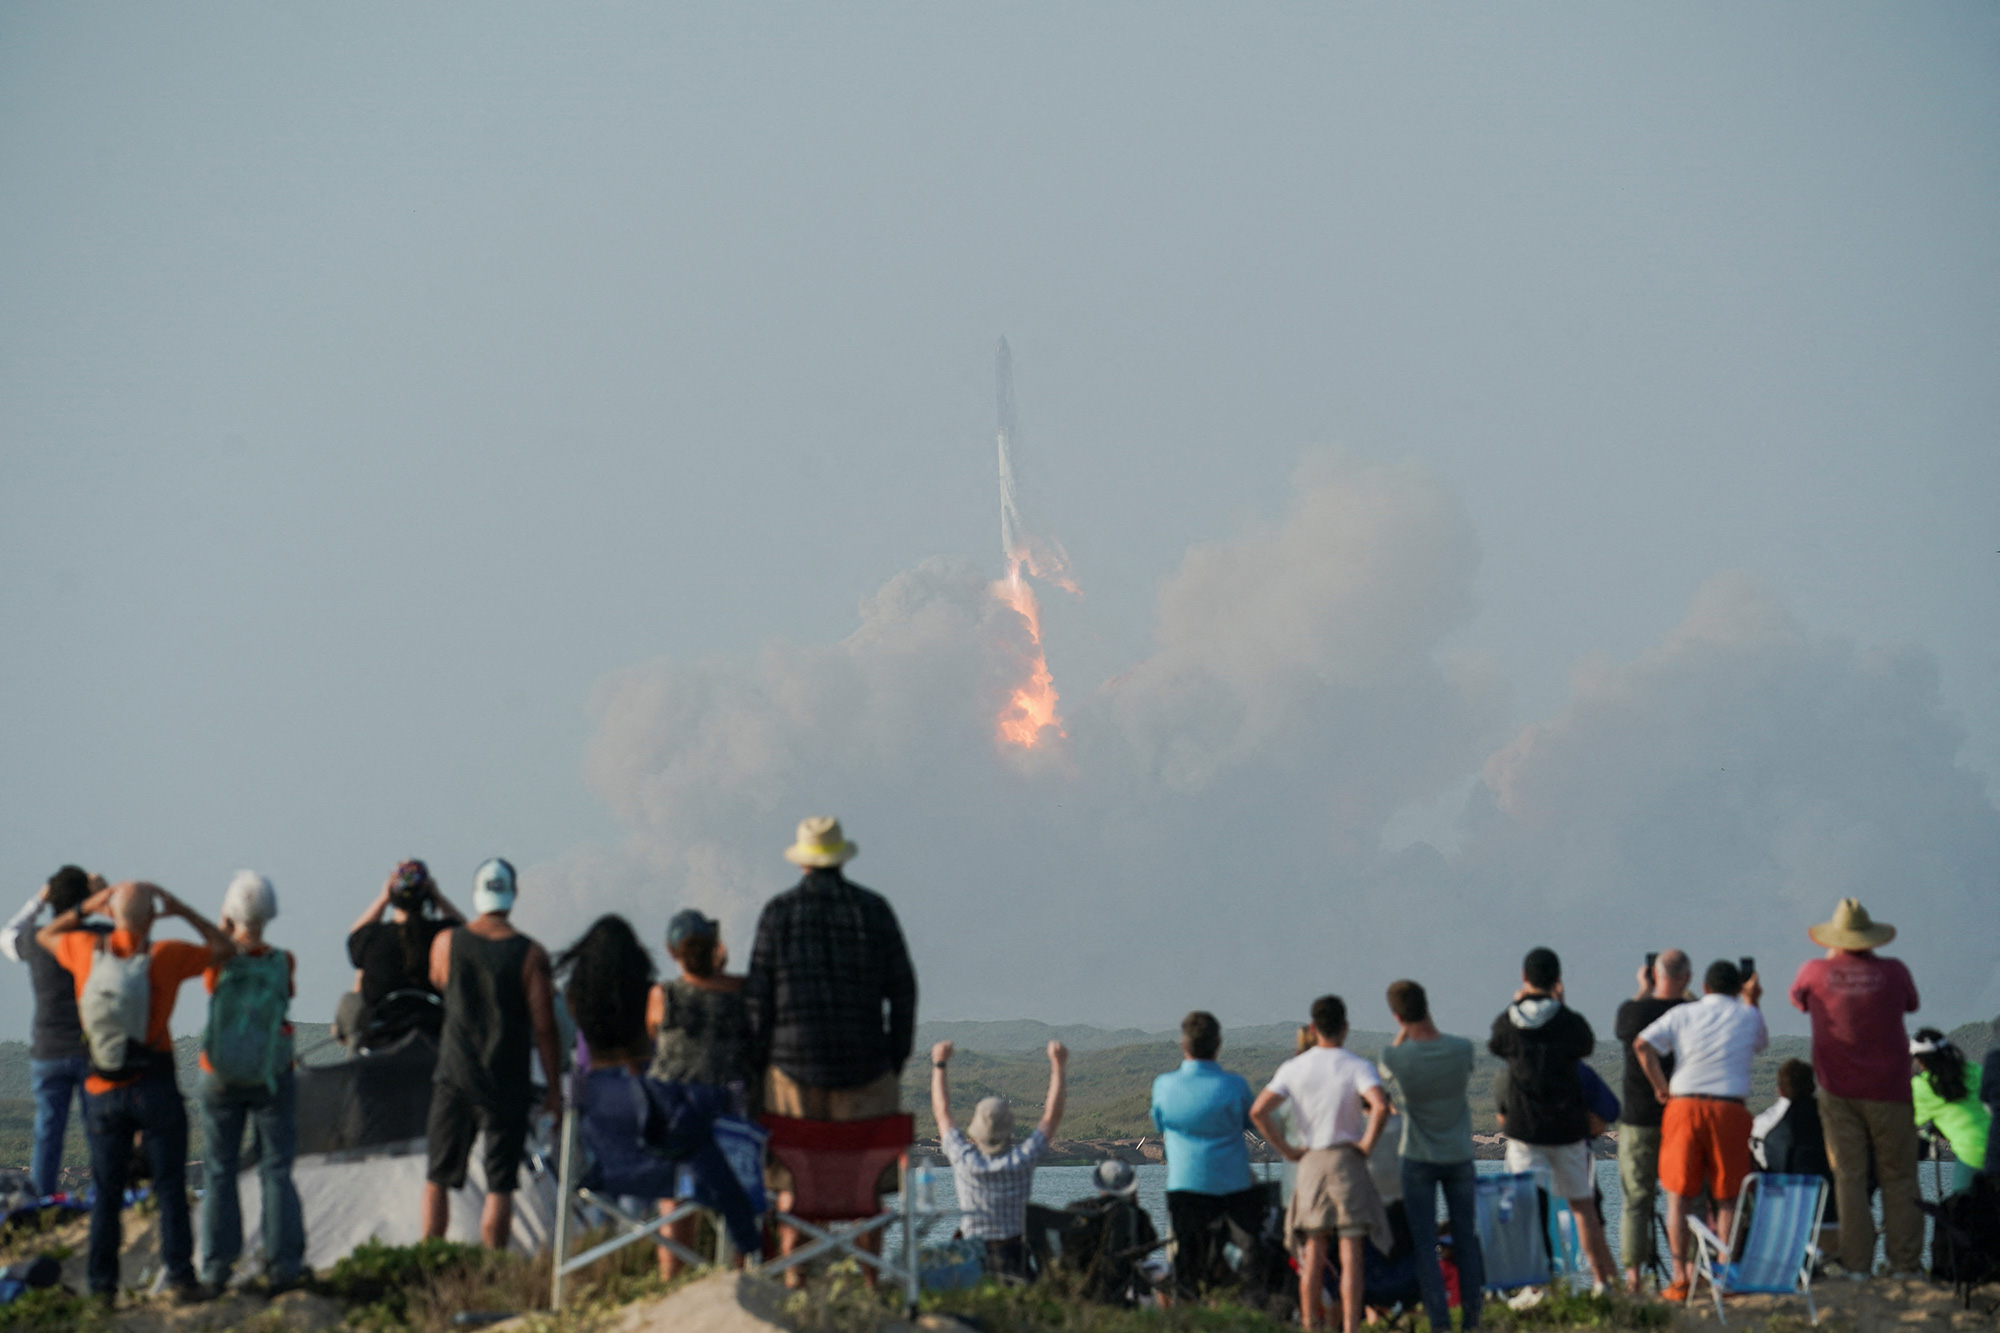 SpaceX's Starship lifts off for the uncrewed test flight in Boca Chica, Texas, on April 20.